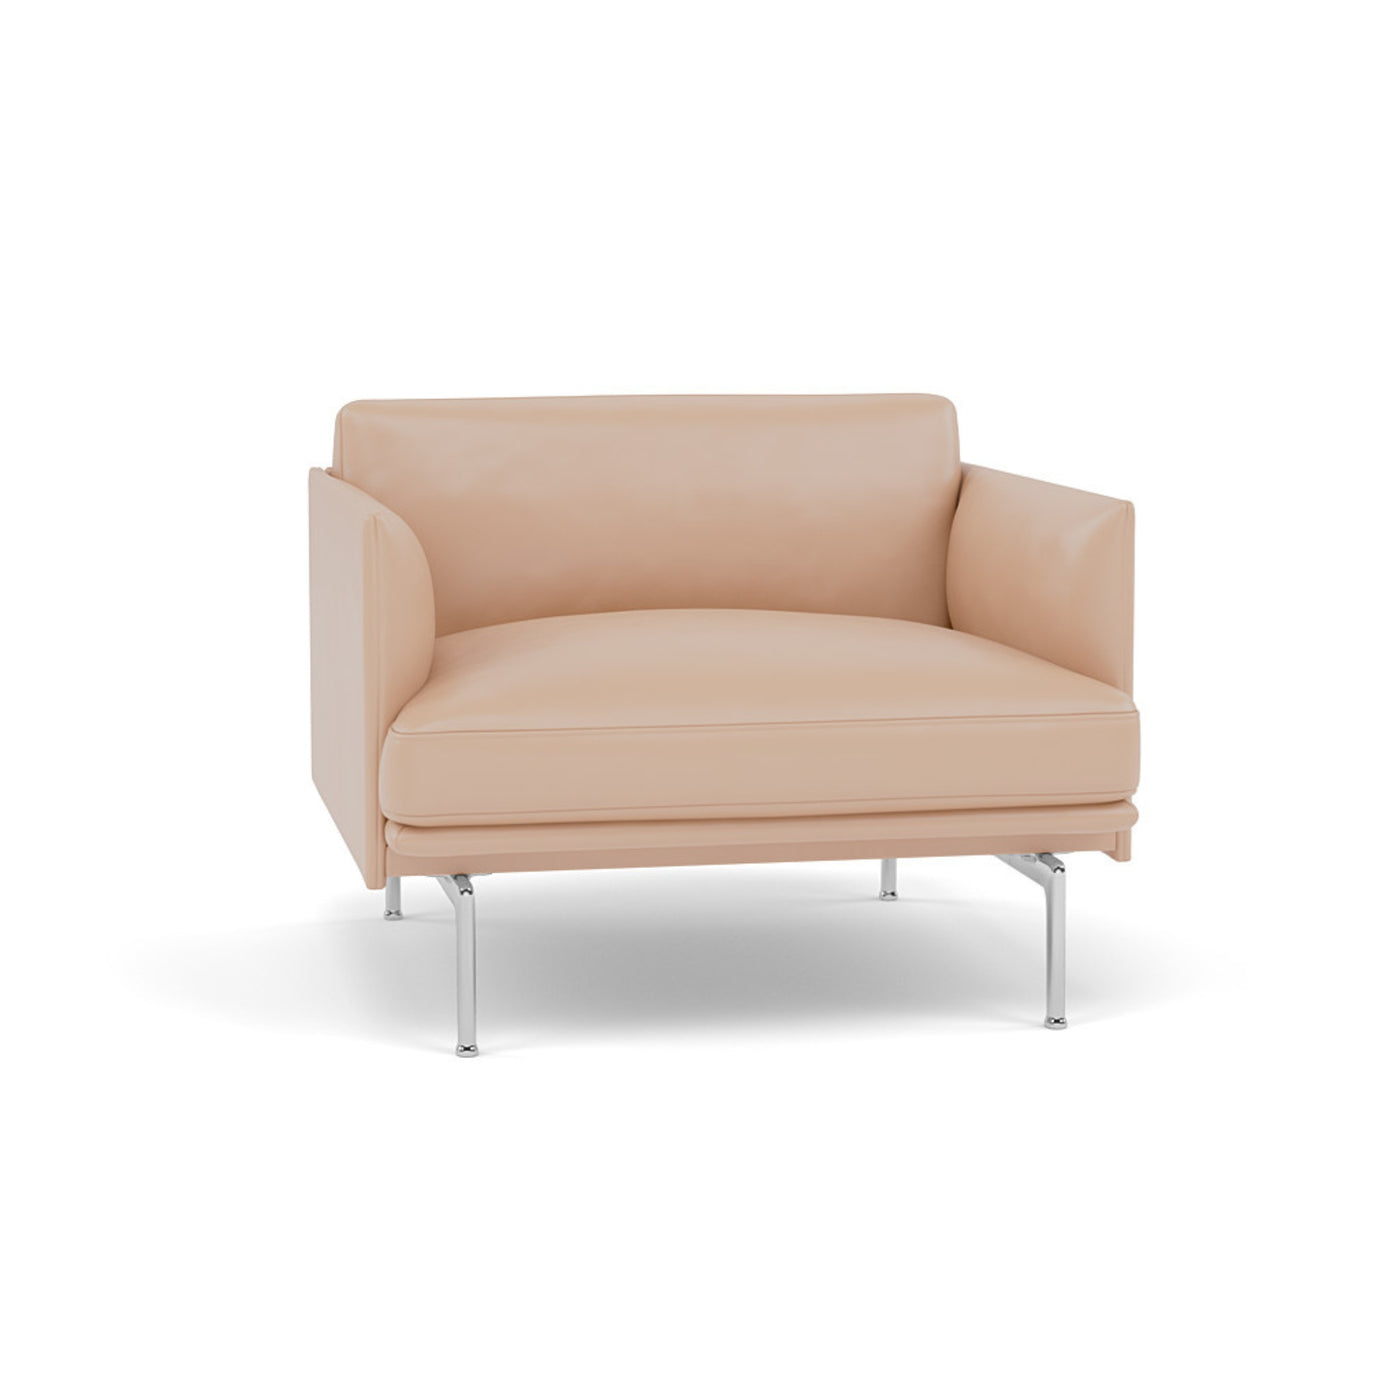 Muuto Outline Chair. Made to order from someday designs. #colour_beige-refine-leather